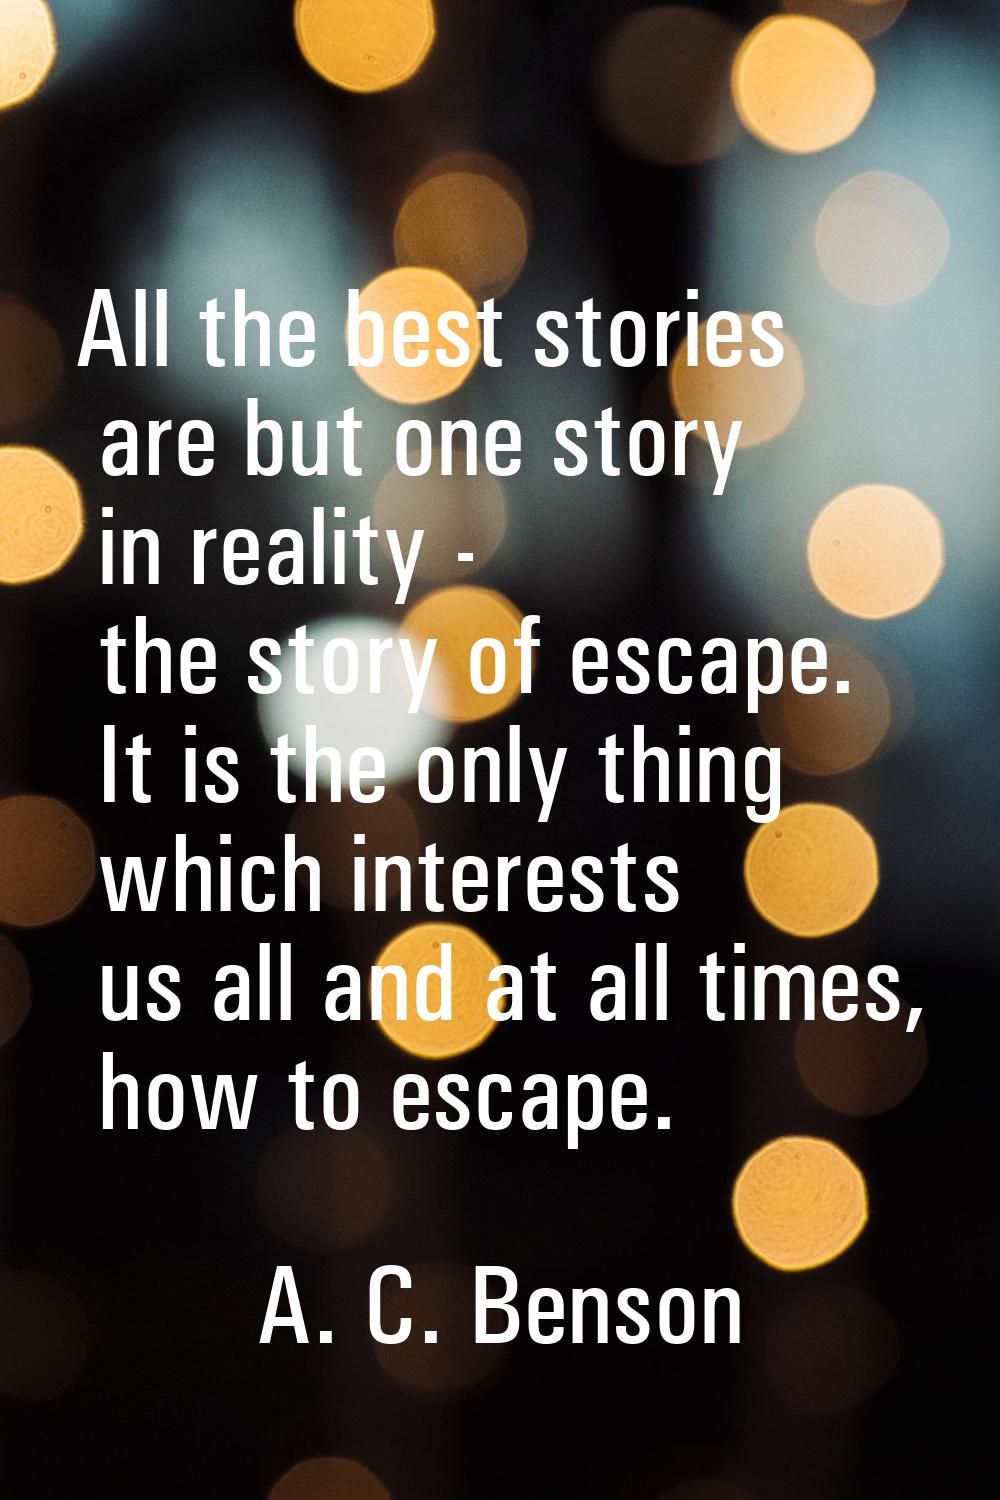 All the best stories are but one story in reality - the story of escape. It is the only thing which